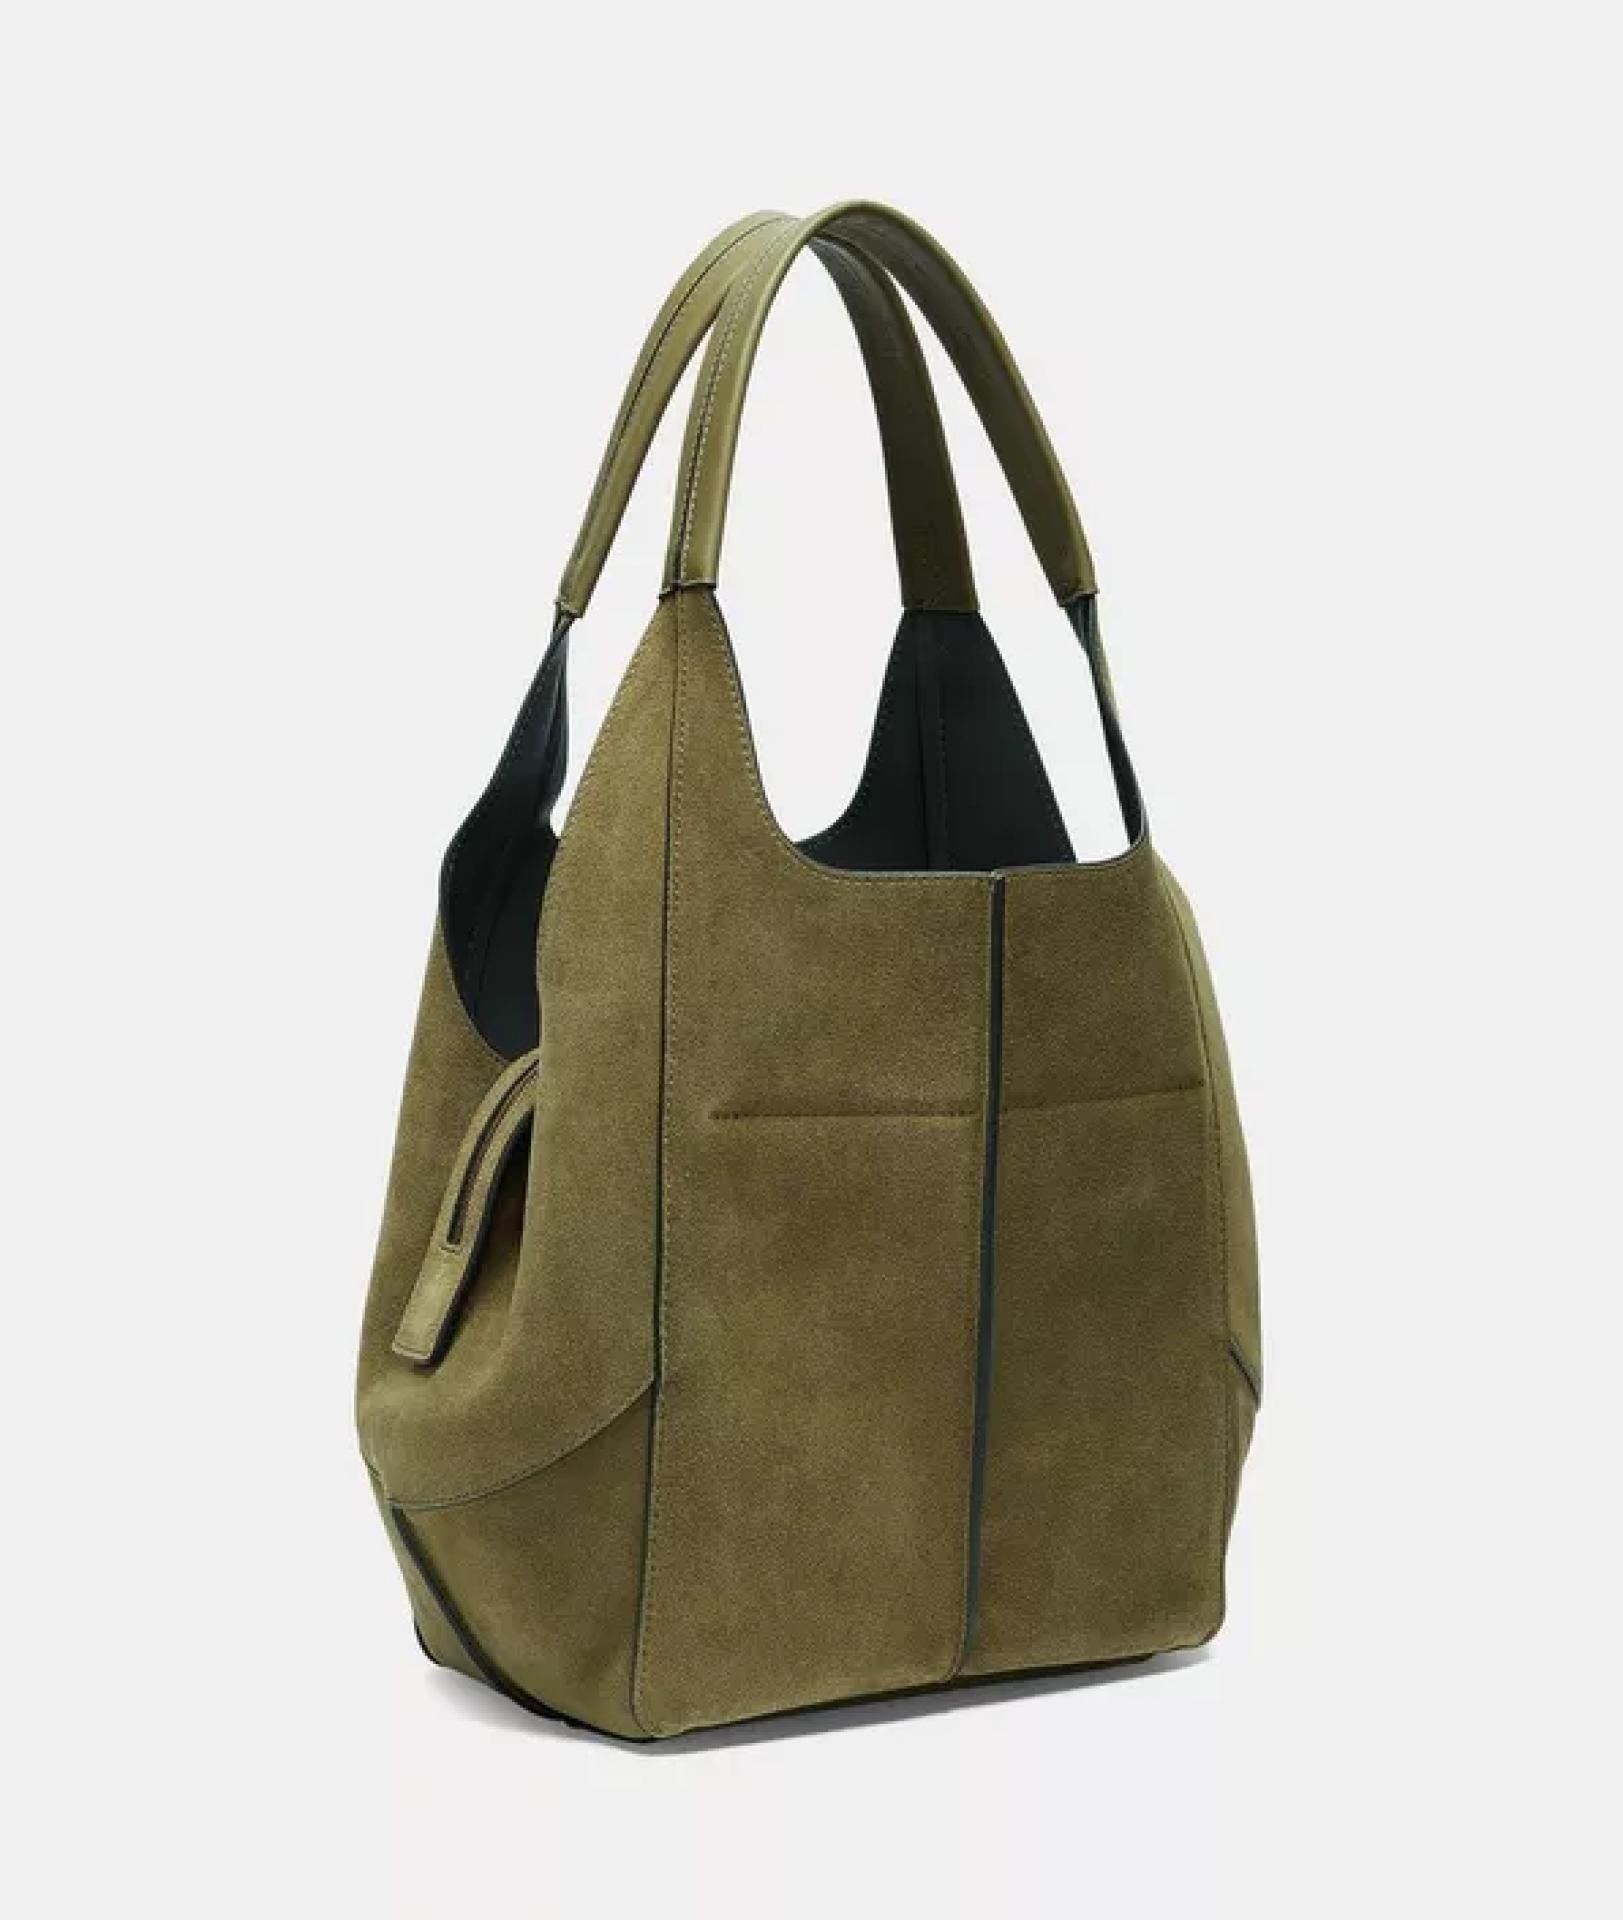 Liebeskind Tote LILLY Hydro Suede Tea